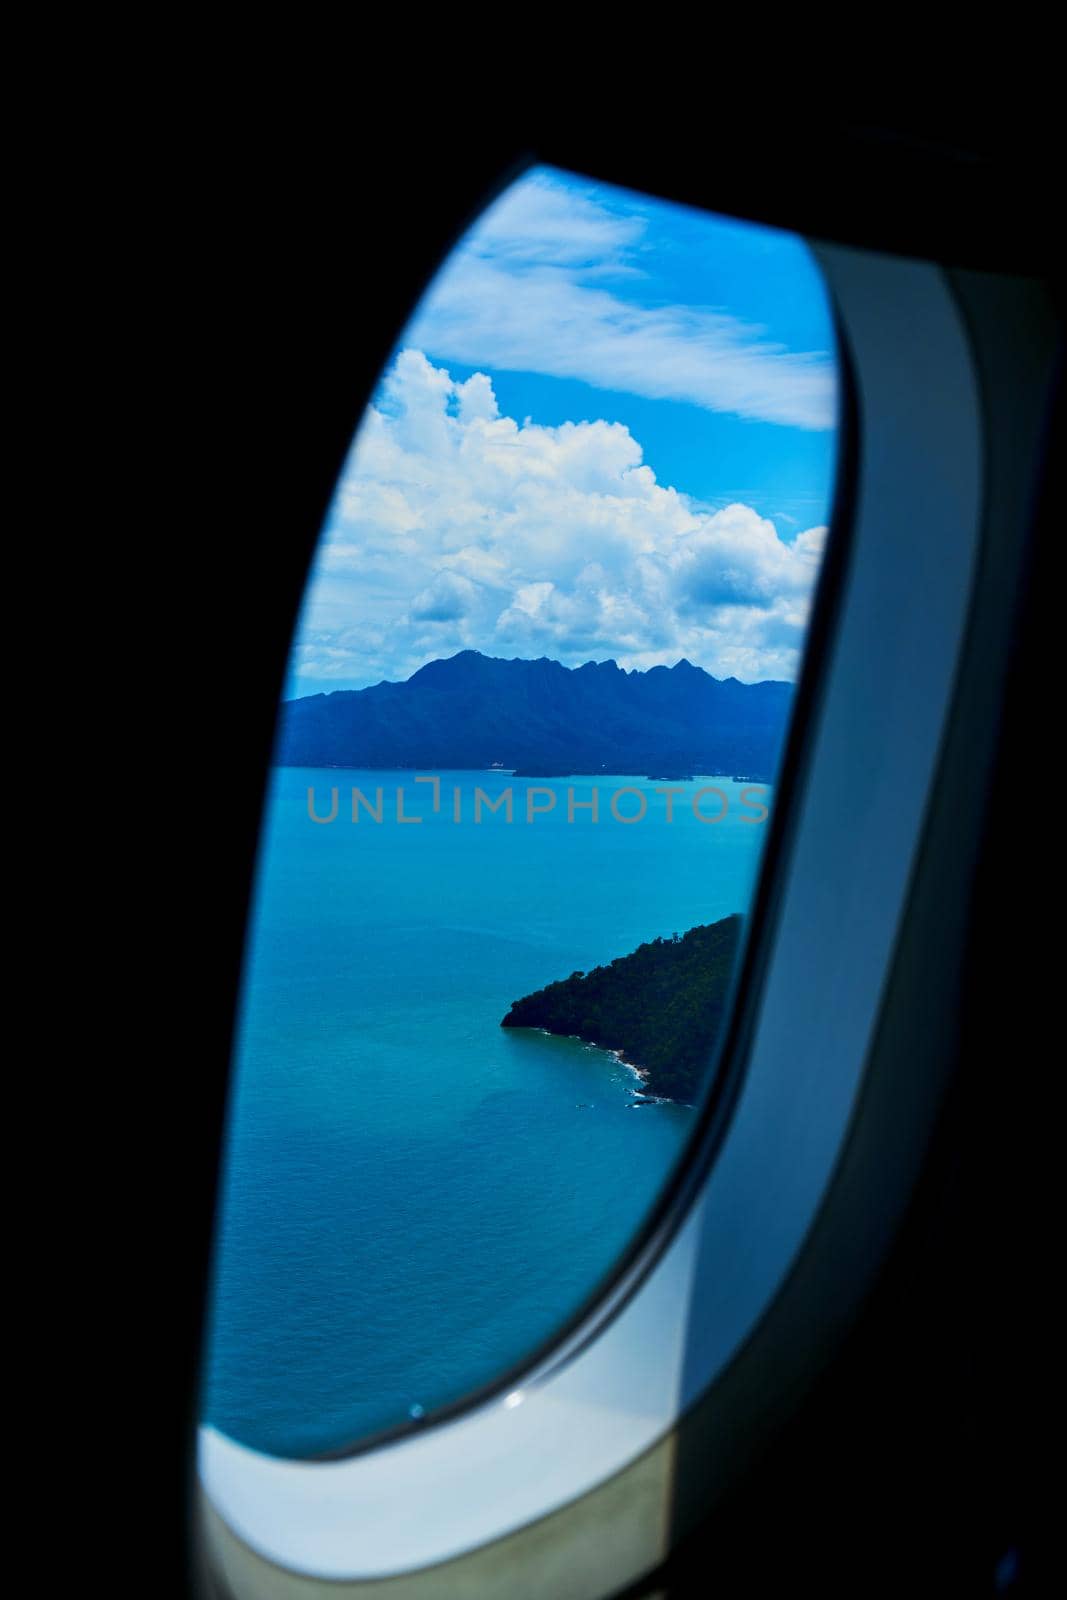 A view of a tropical island from the window of a landing plane